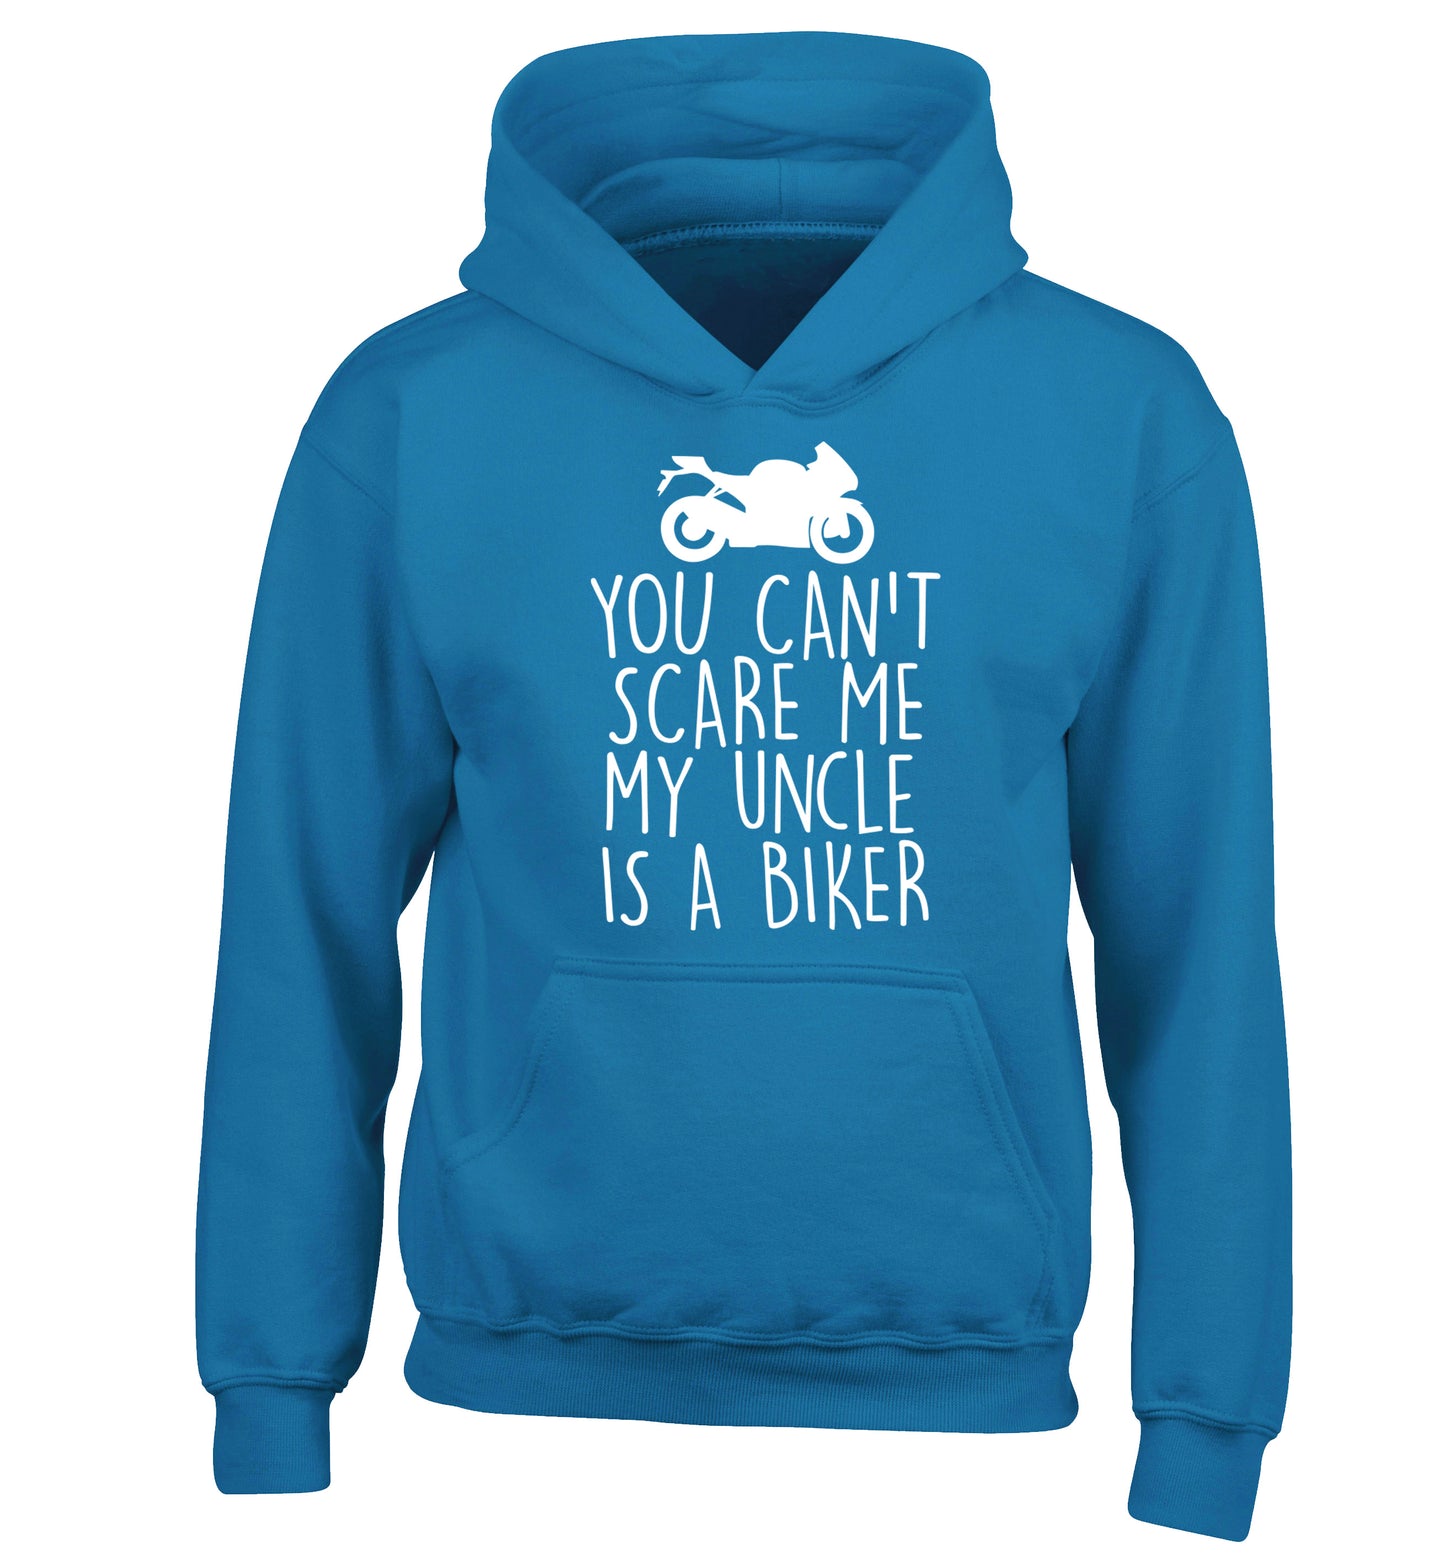 You can't scare me my uncle is a biker children's blue hoodie 12-13 Years